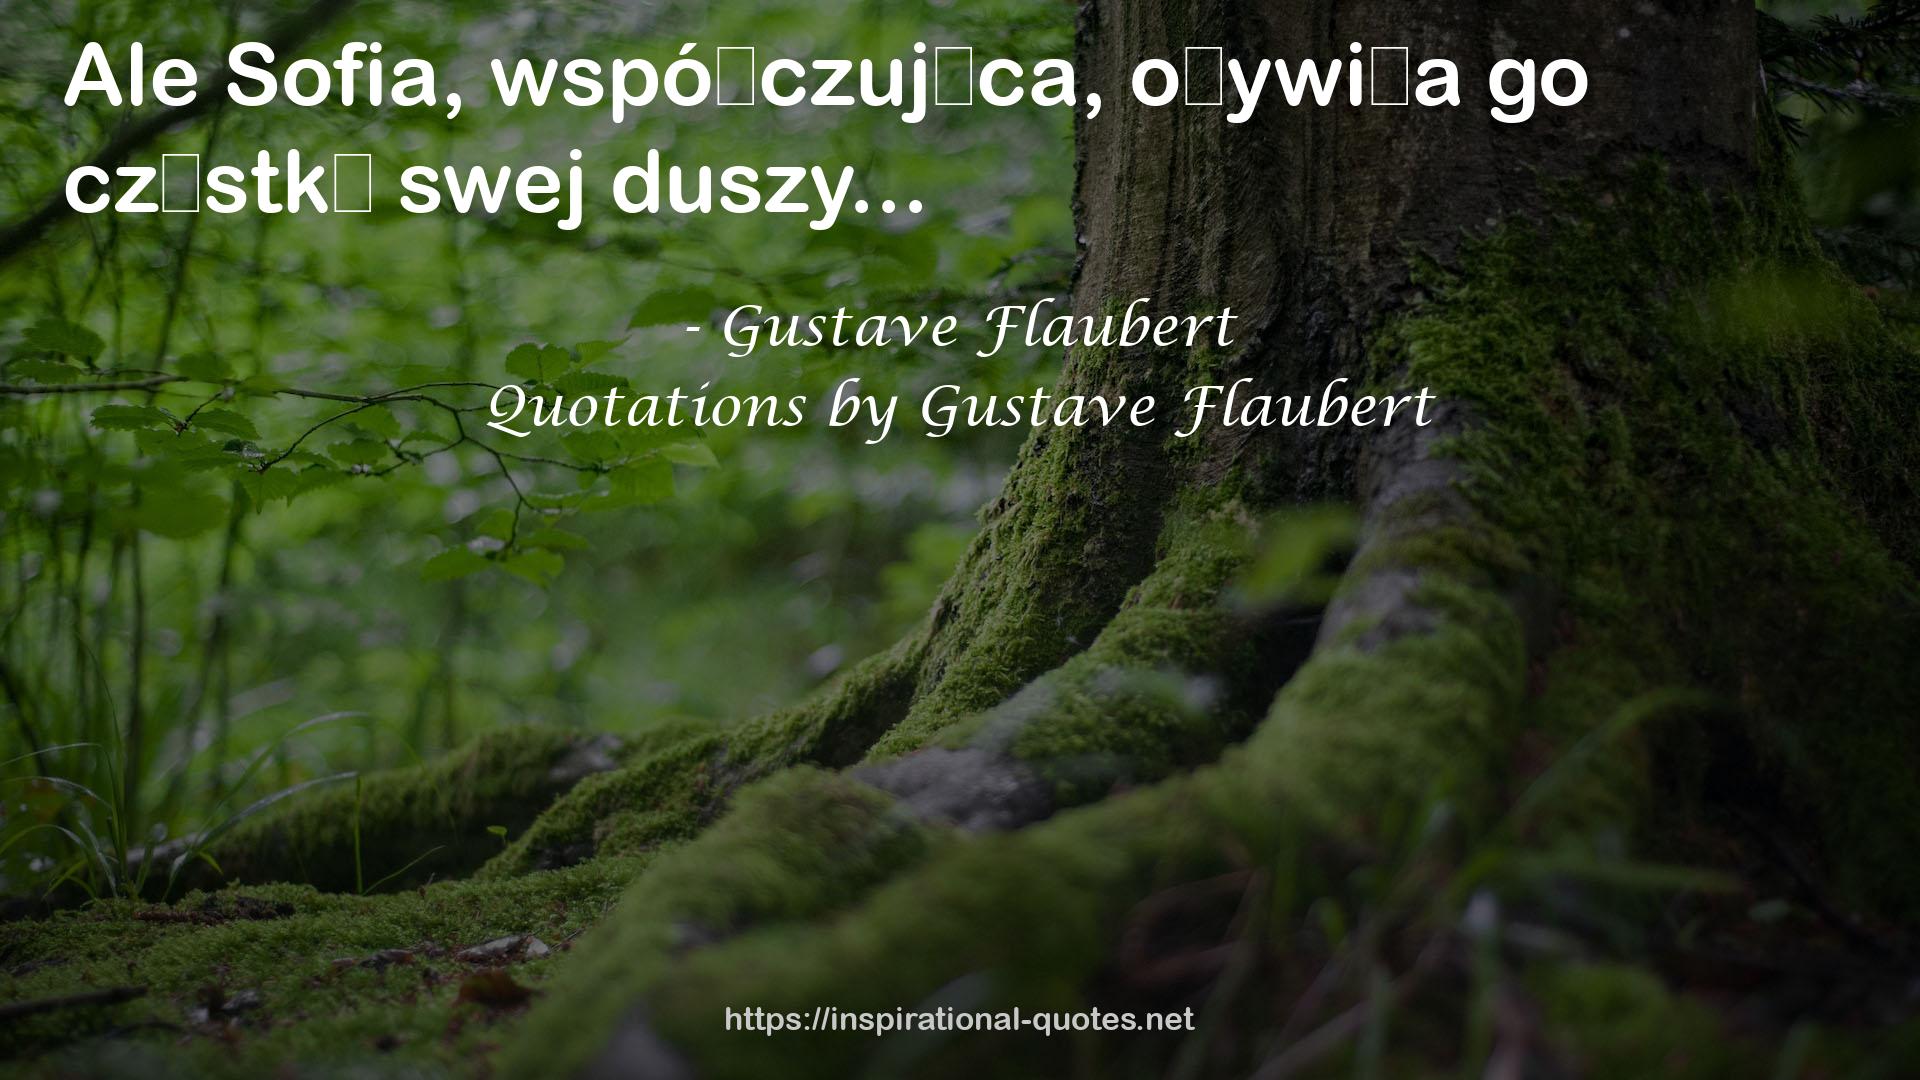 Quotations by Gustave Flaubert QUOTES